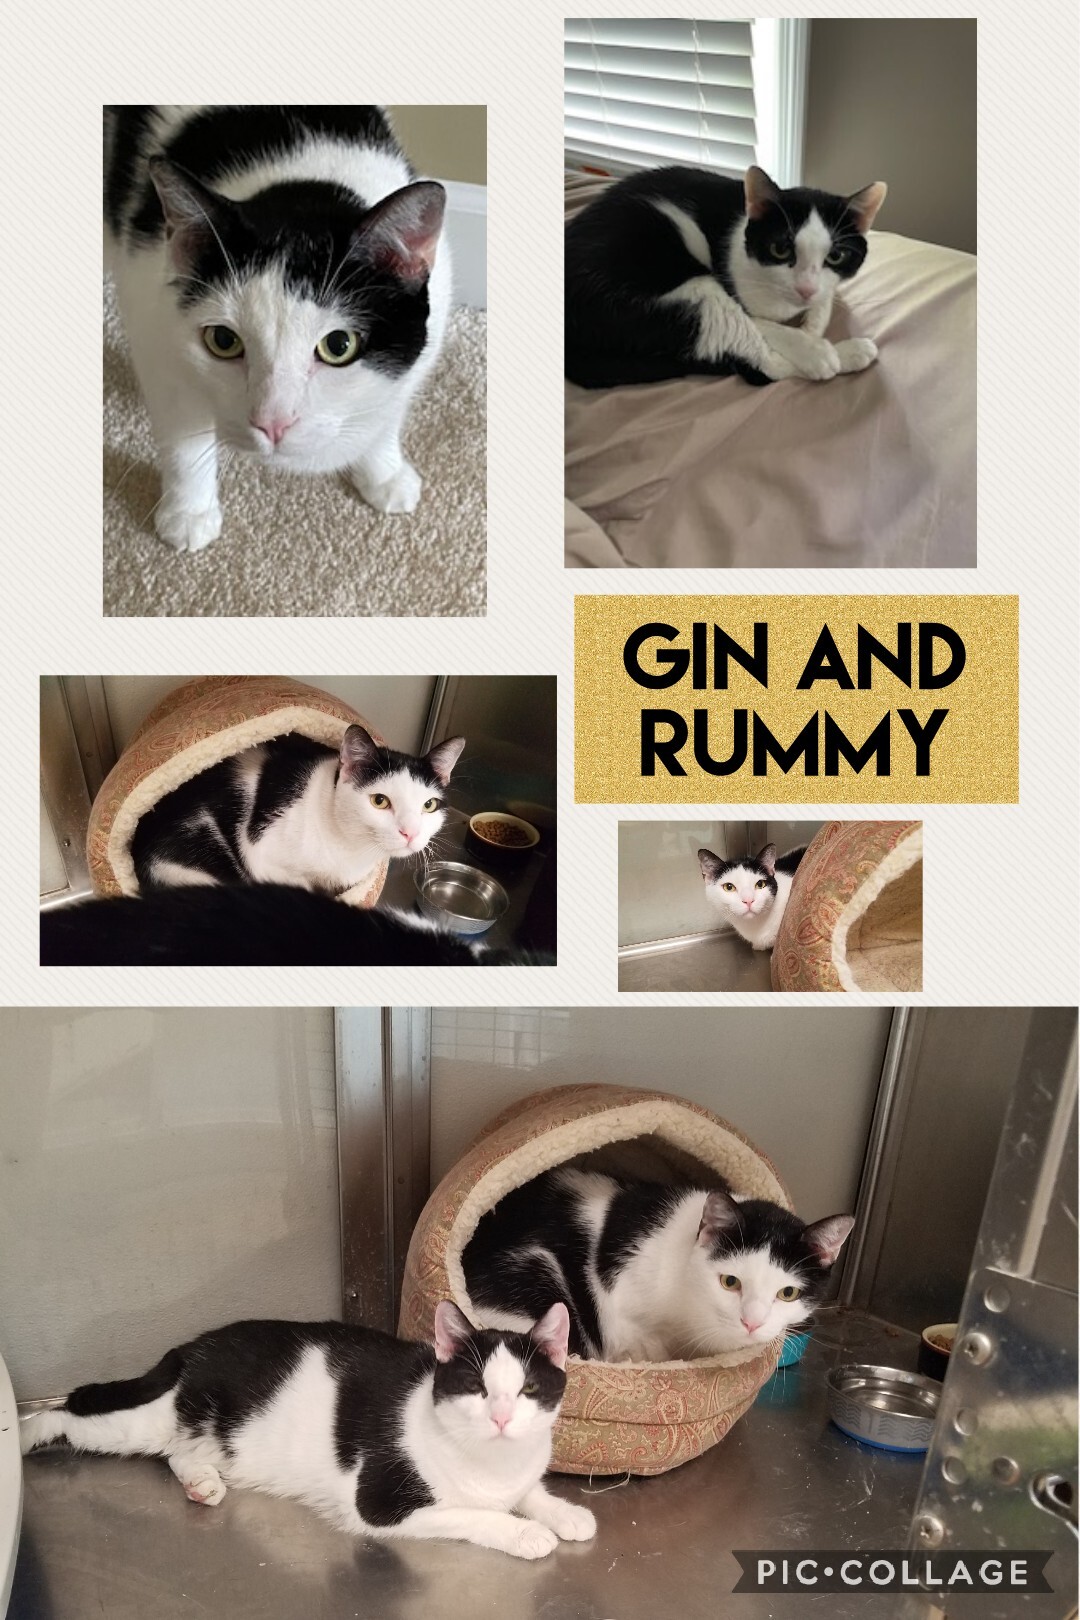 Gin And Rummy detail page